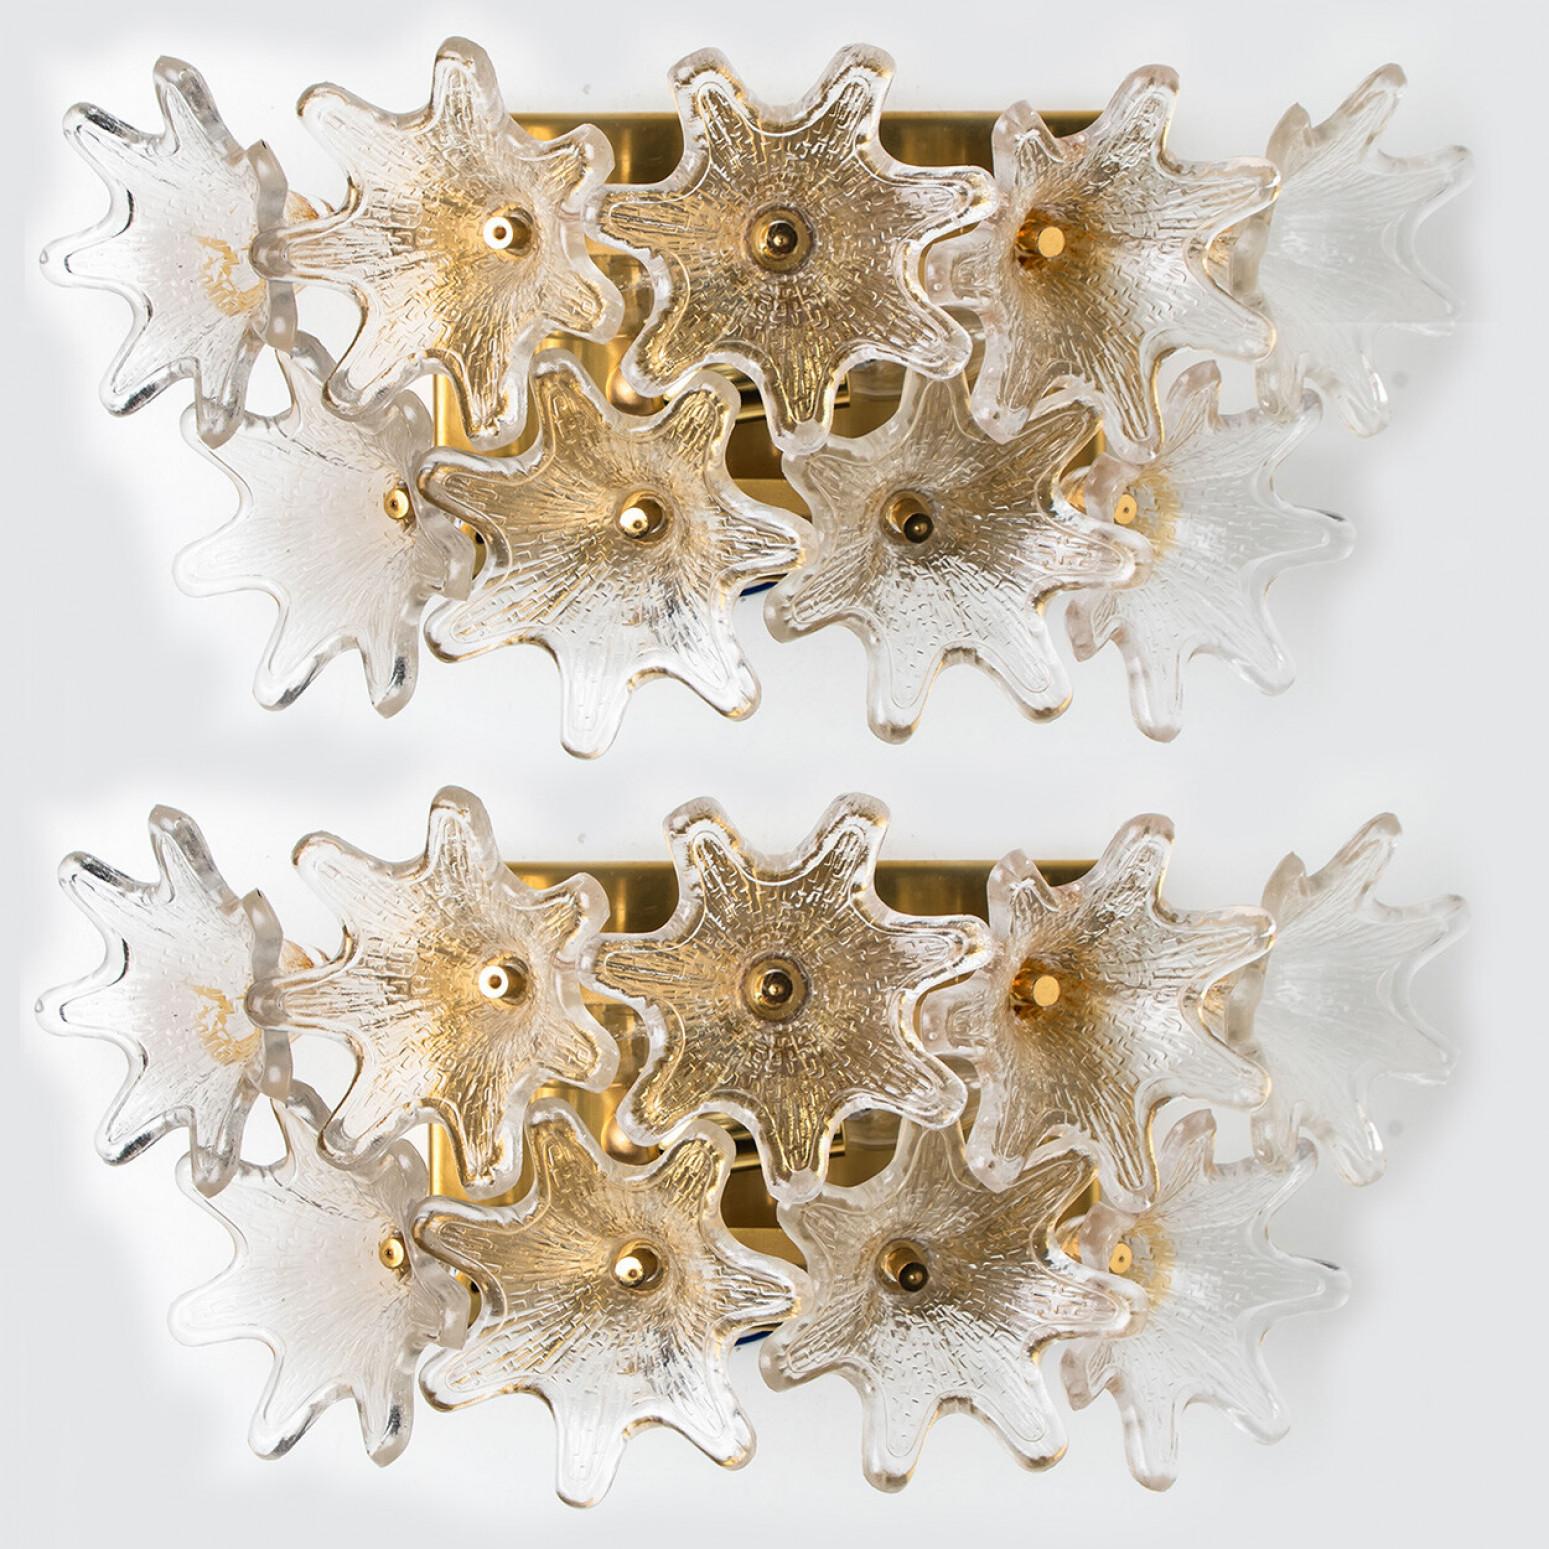 One of the three pairs of light fixtures by Paolo Venini for VeArt, Italy, 1960s. Brass hardware. Several star shaped clear resembles flowers. The fixture illuminates beautifully on wall.

Exceptional pieces and in this quantity extreme rare to